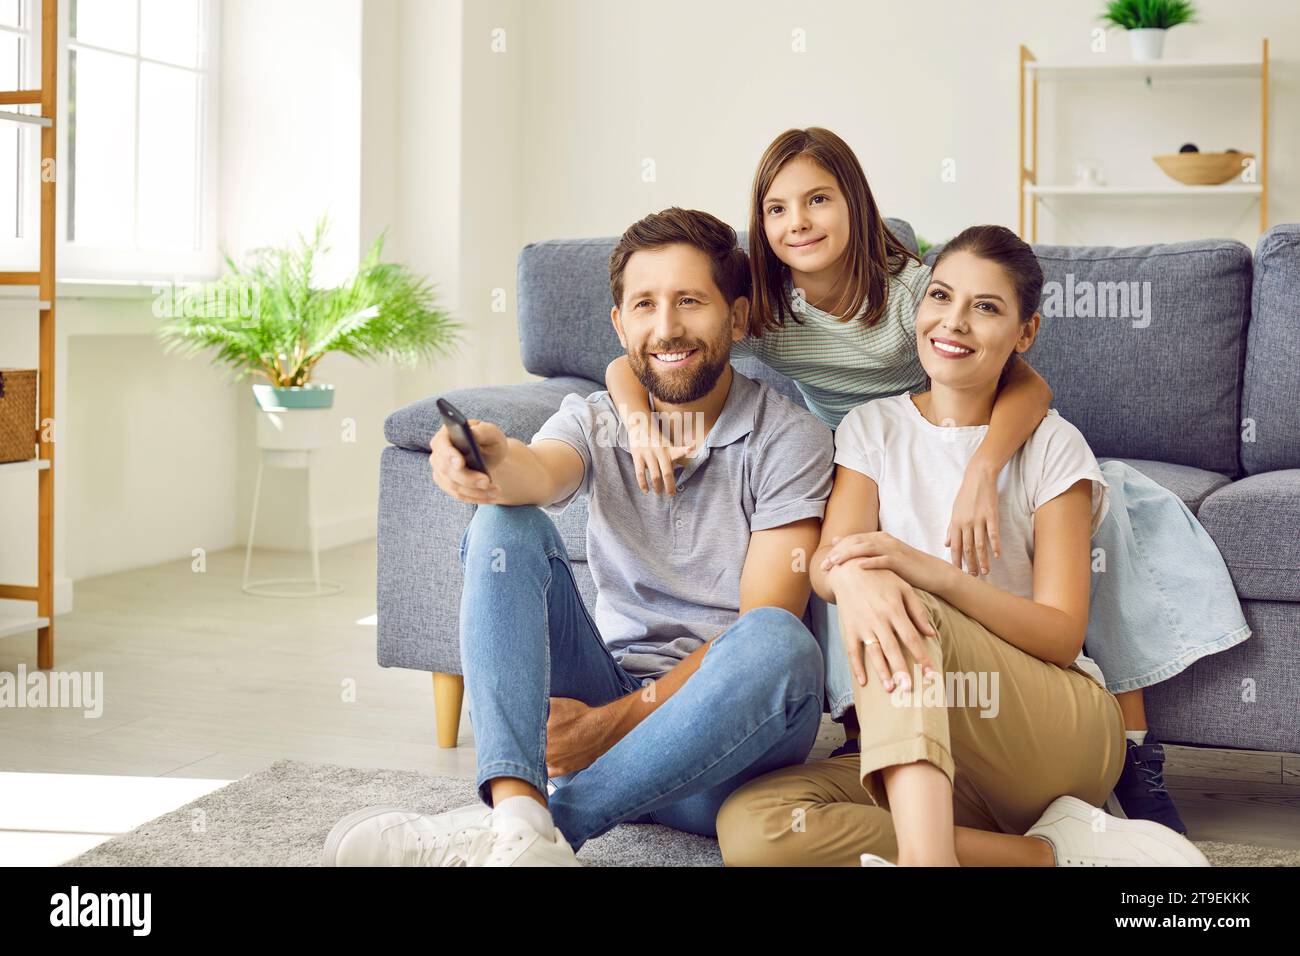 Happy mom, dad and child sitting on floor by sofa and watching television show together Stock Photo